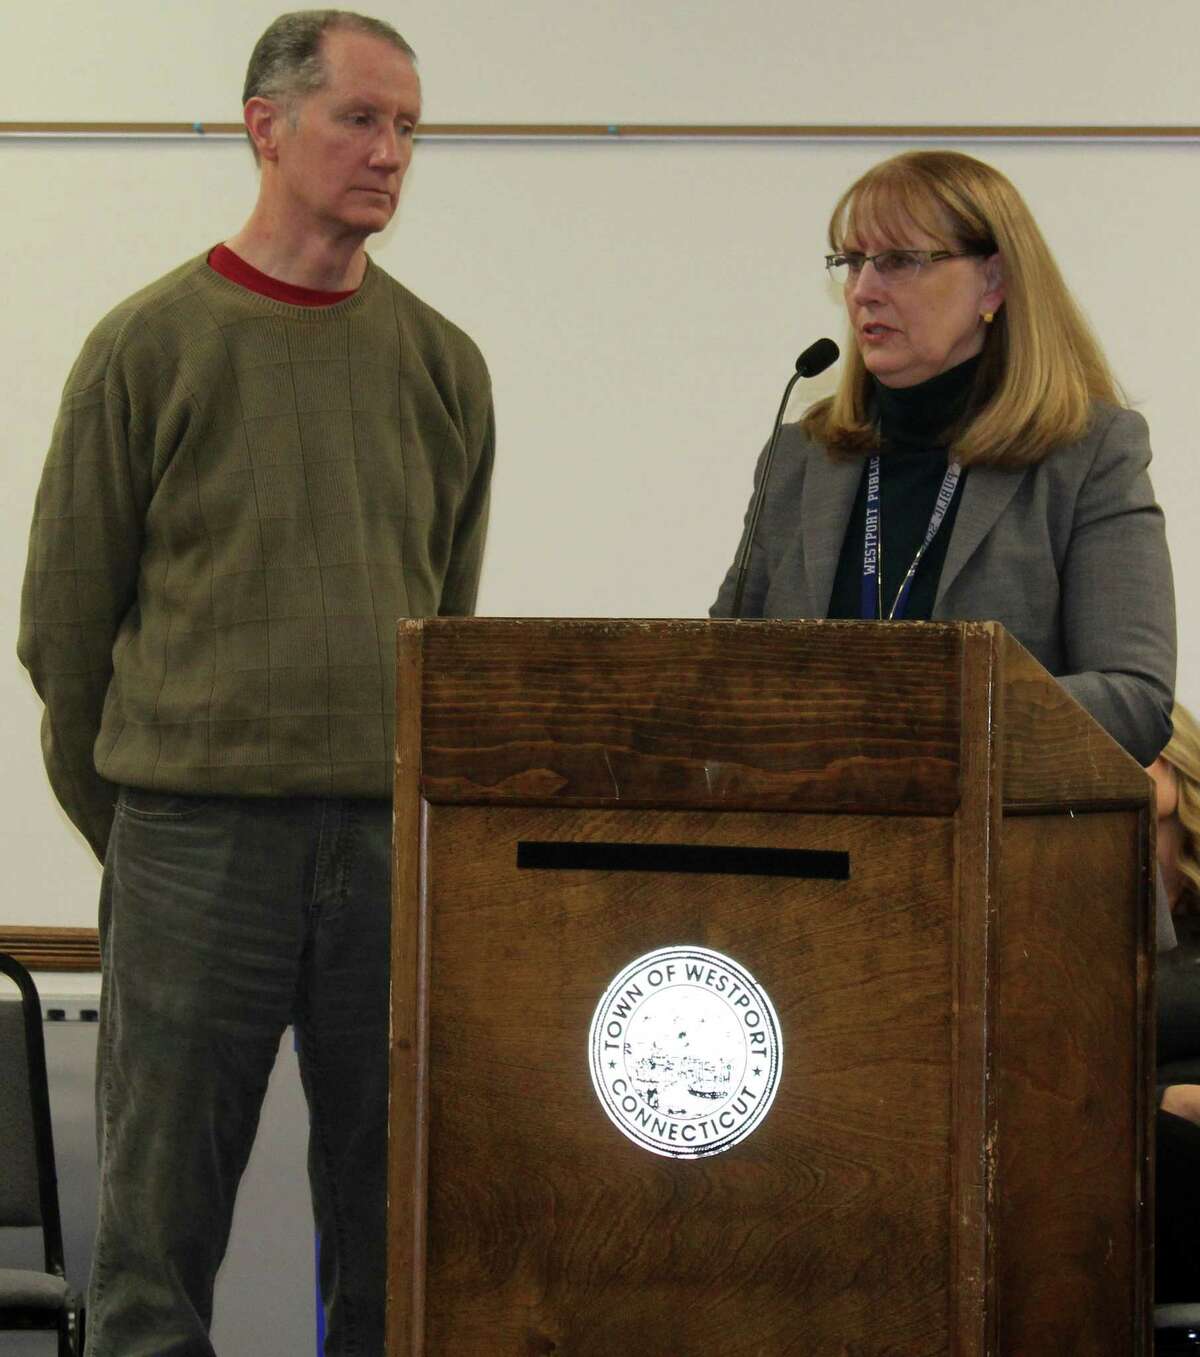 Westport Public Schools Superintendent Colleen Palmer asked the Board of Finance to appropriate four million dollars for the purchase or rental of portable classrooms for the elementary schools at the board's Feb. 5 meeting in Westport Town Hall with education board Chair Mark Mathias by her side.